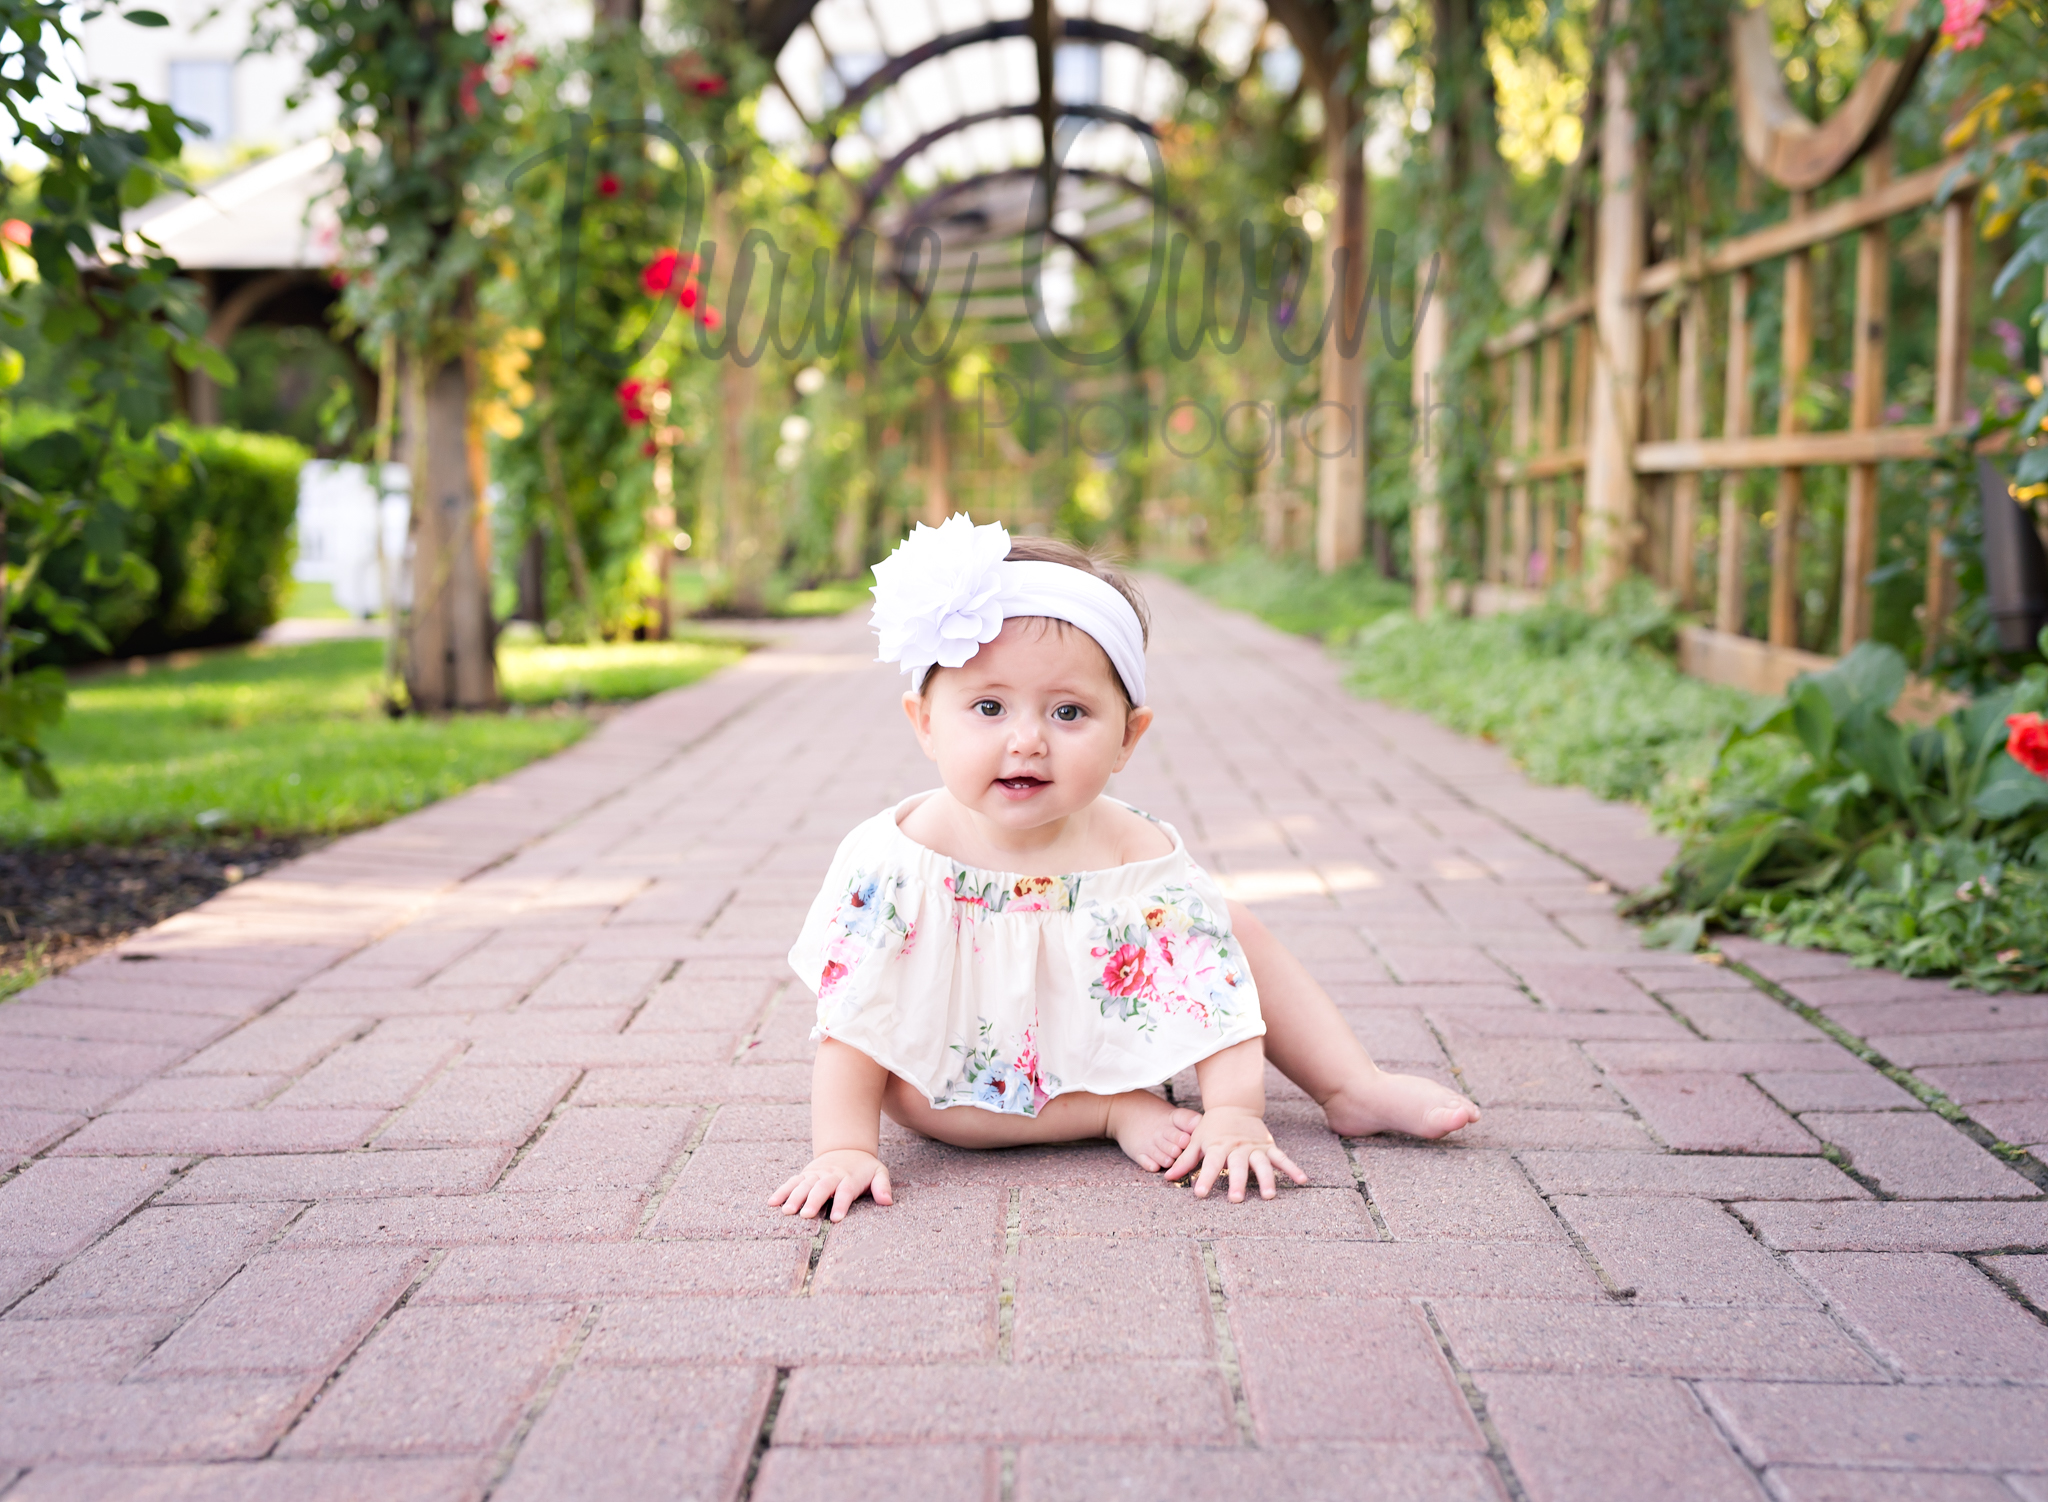 An adorable baby in a floral romper.